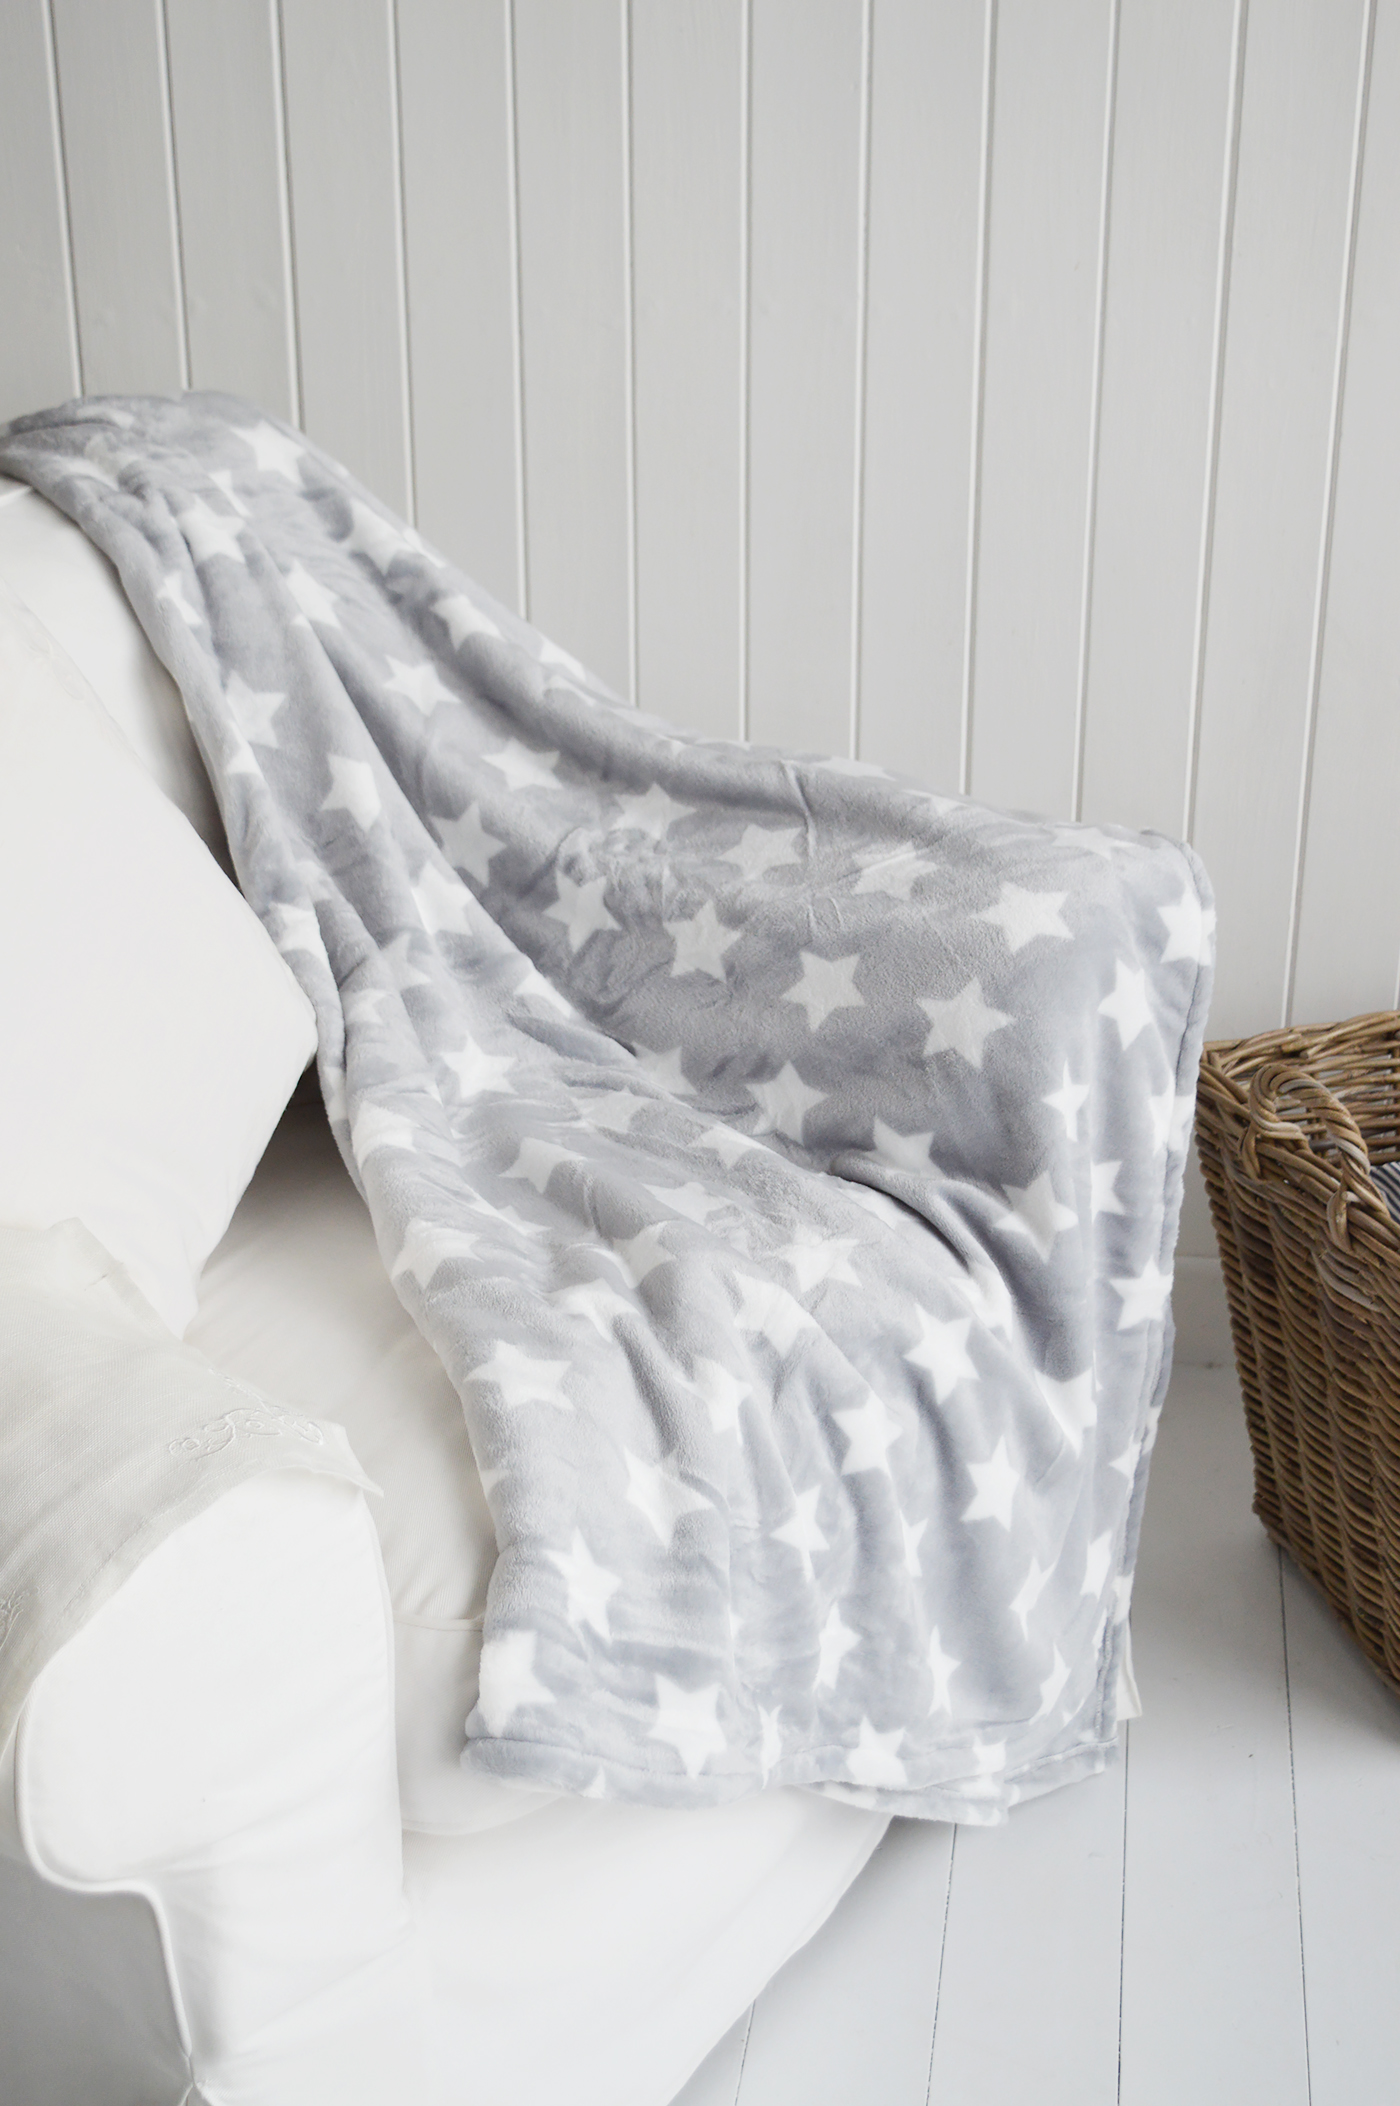 Grey and White Star Throws for bed and sofa  from The White Lighthouse Furniture and Interiors for the Hallway, living room, bedroom and bathroom in New England styles country, coastal and city homes